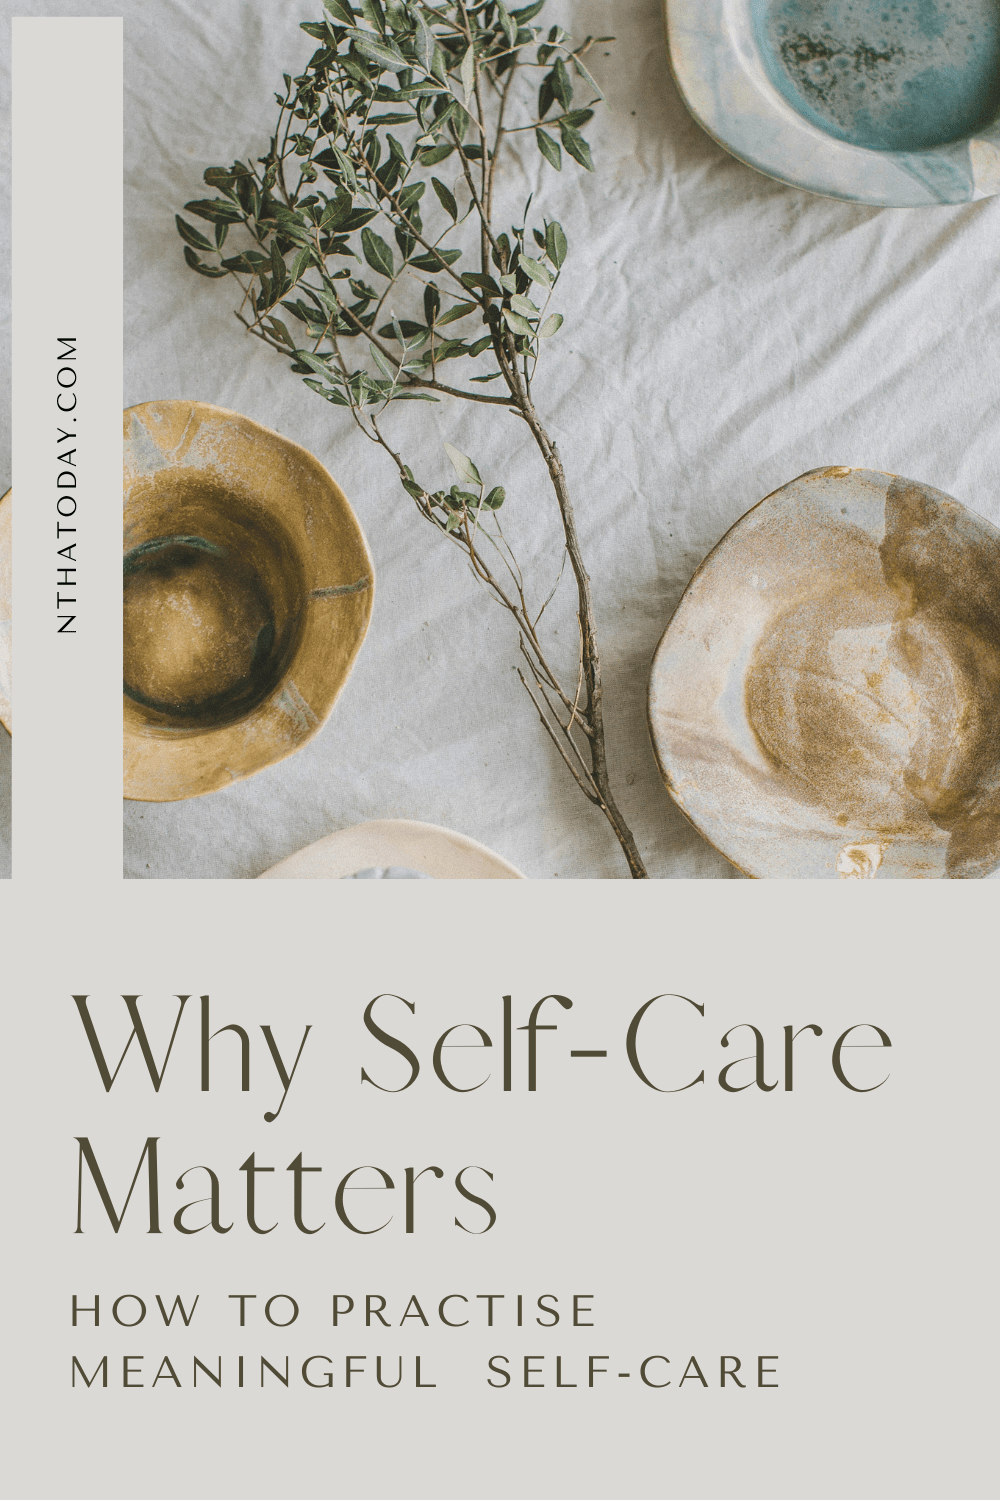 Why self-care matters